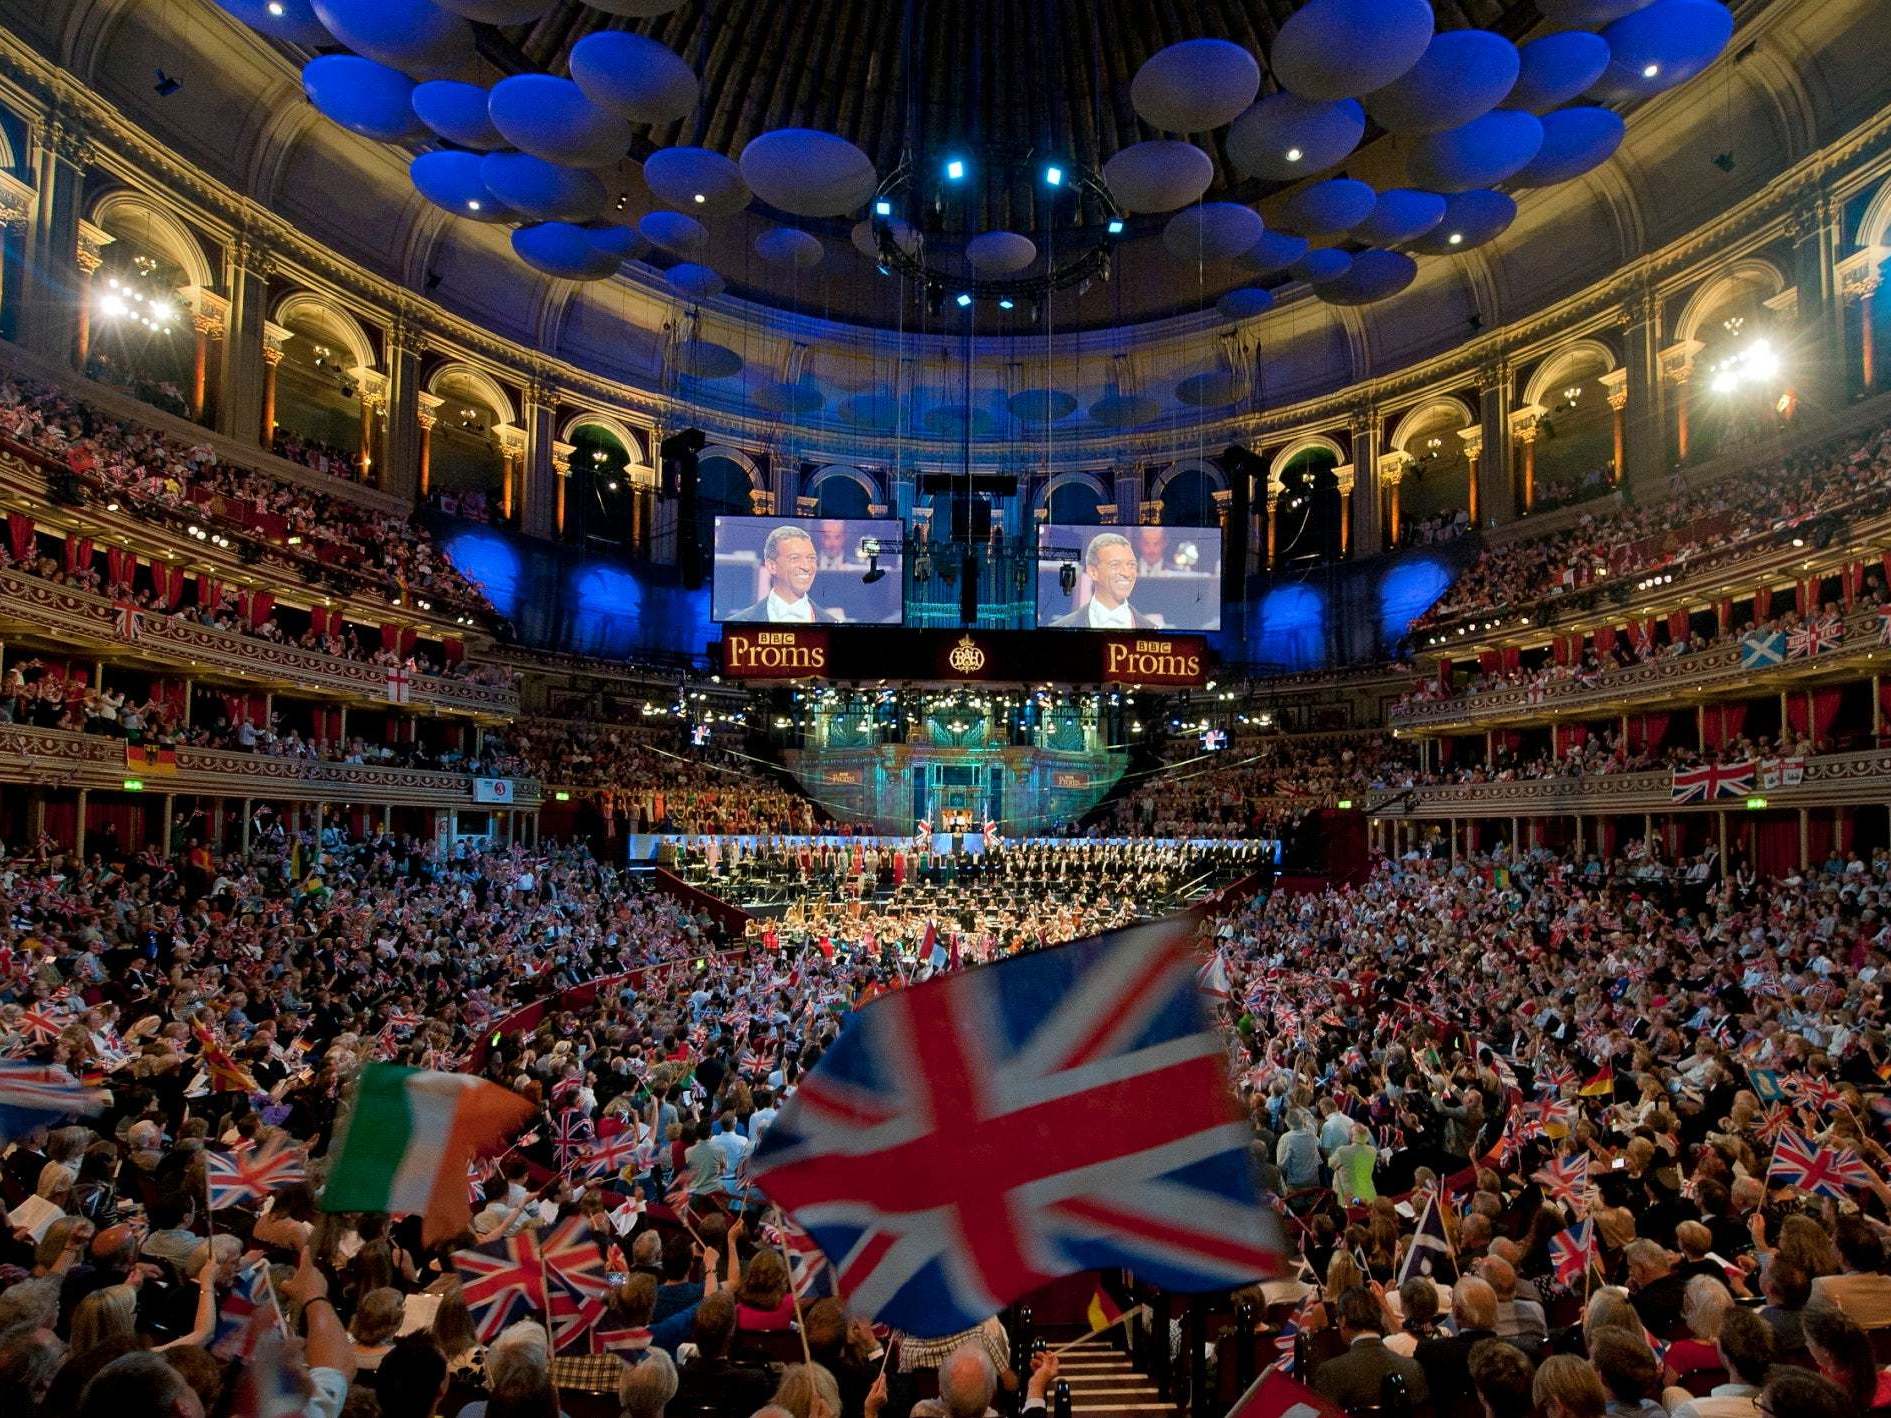 'Rule, Britannia!' will be sung at the Last Night of the Proms in 2021